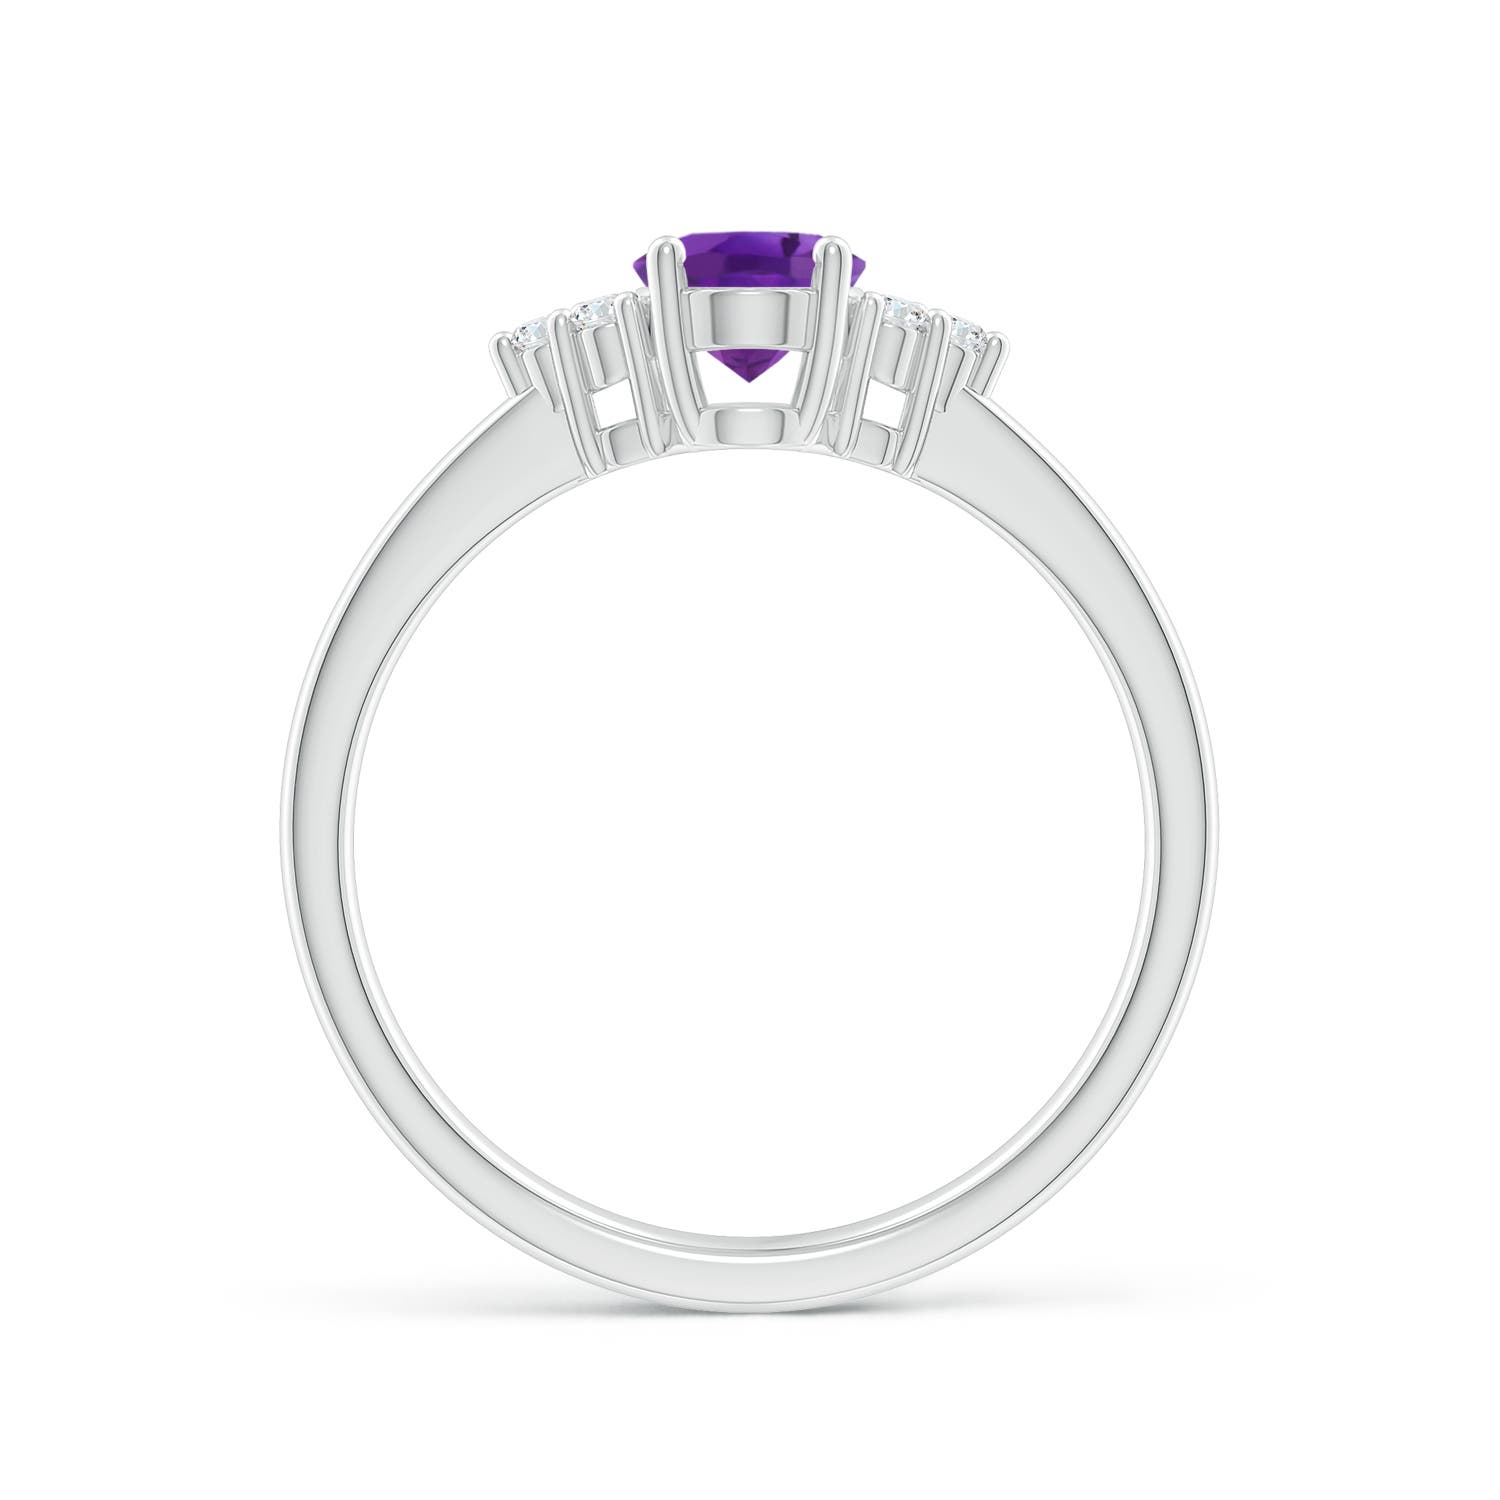 AAA - Amethyst / 0.78 CT / 14 KT White Gold